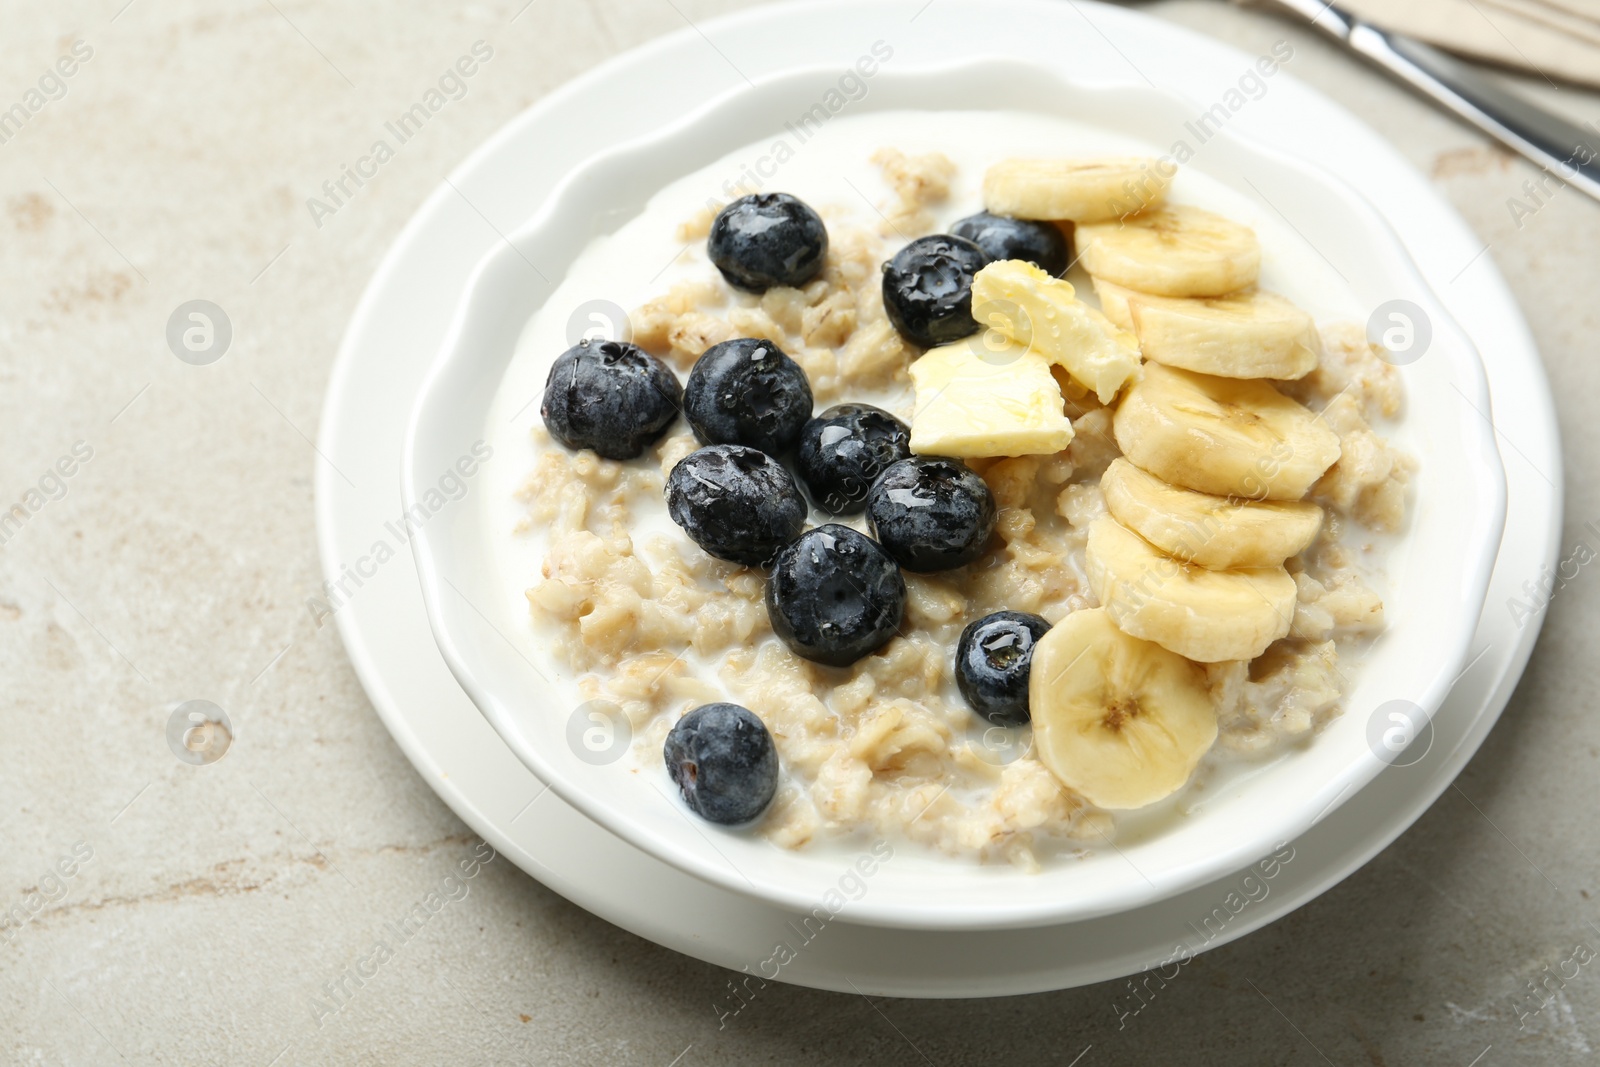 Photo of Tasty oatmeal with banana, blueberries, butter and milk served in bowl on light grey table